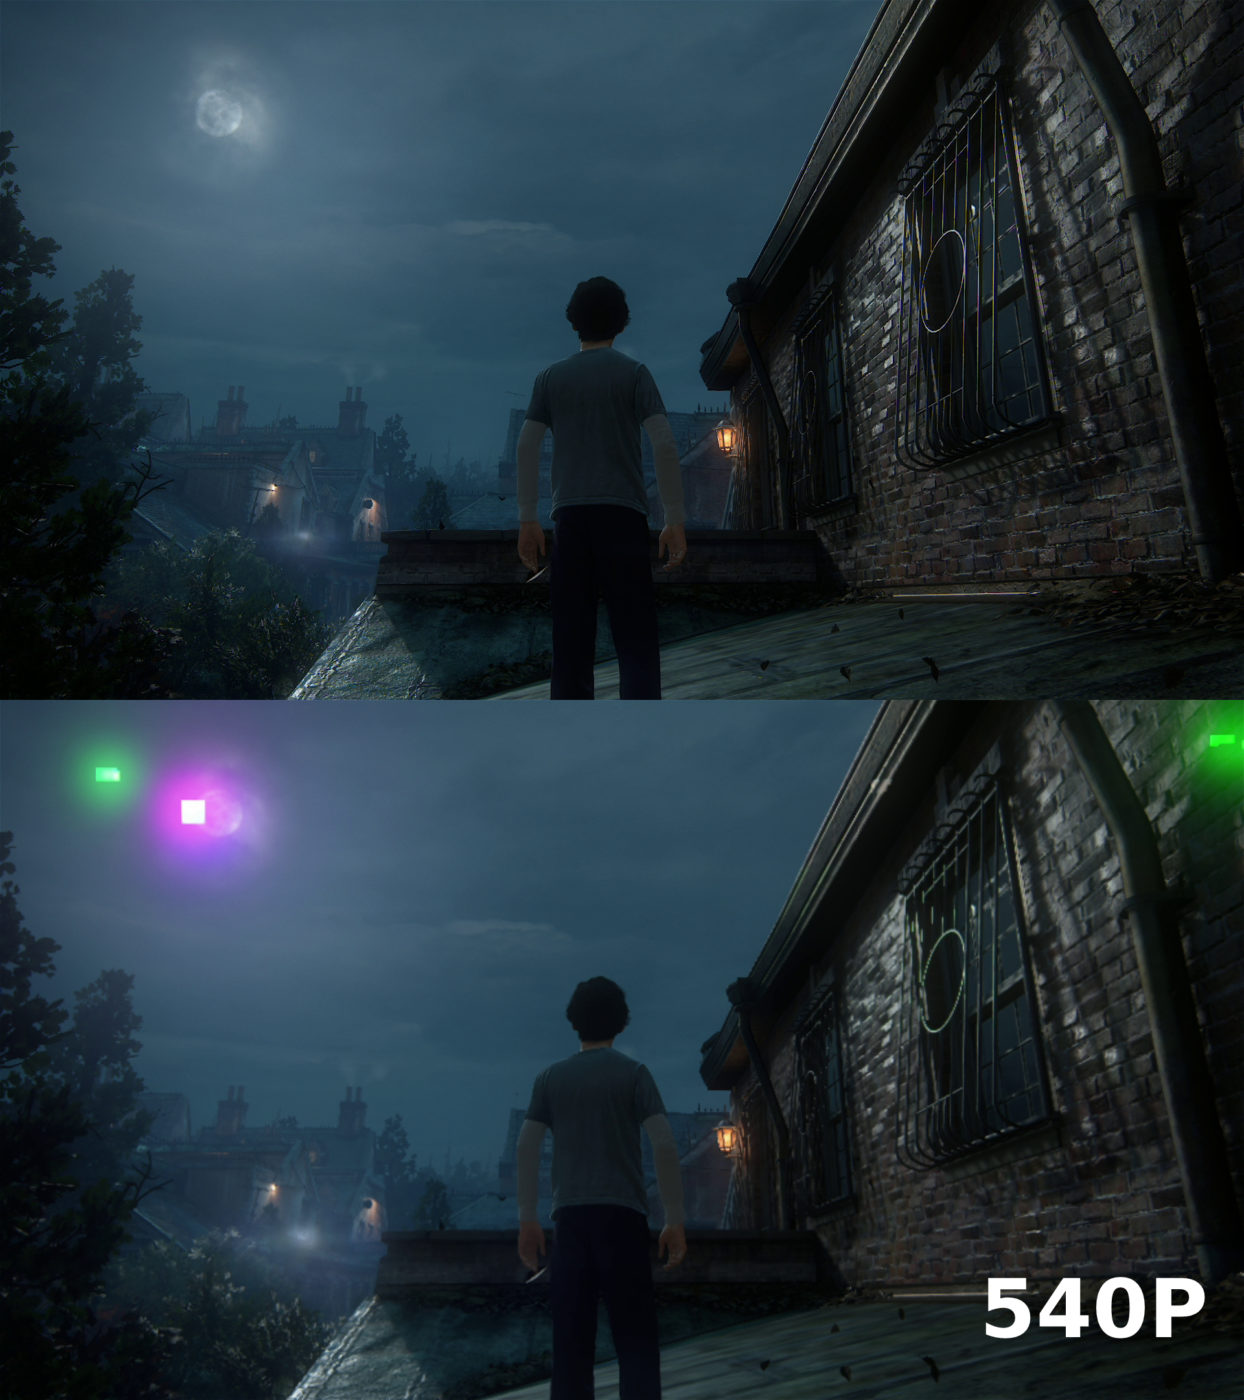 Uncharted-4-60FPS-comparison-image-1-scaled.jpg